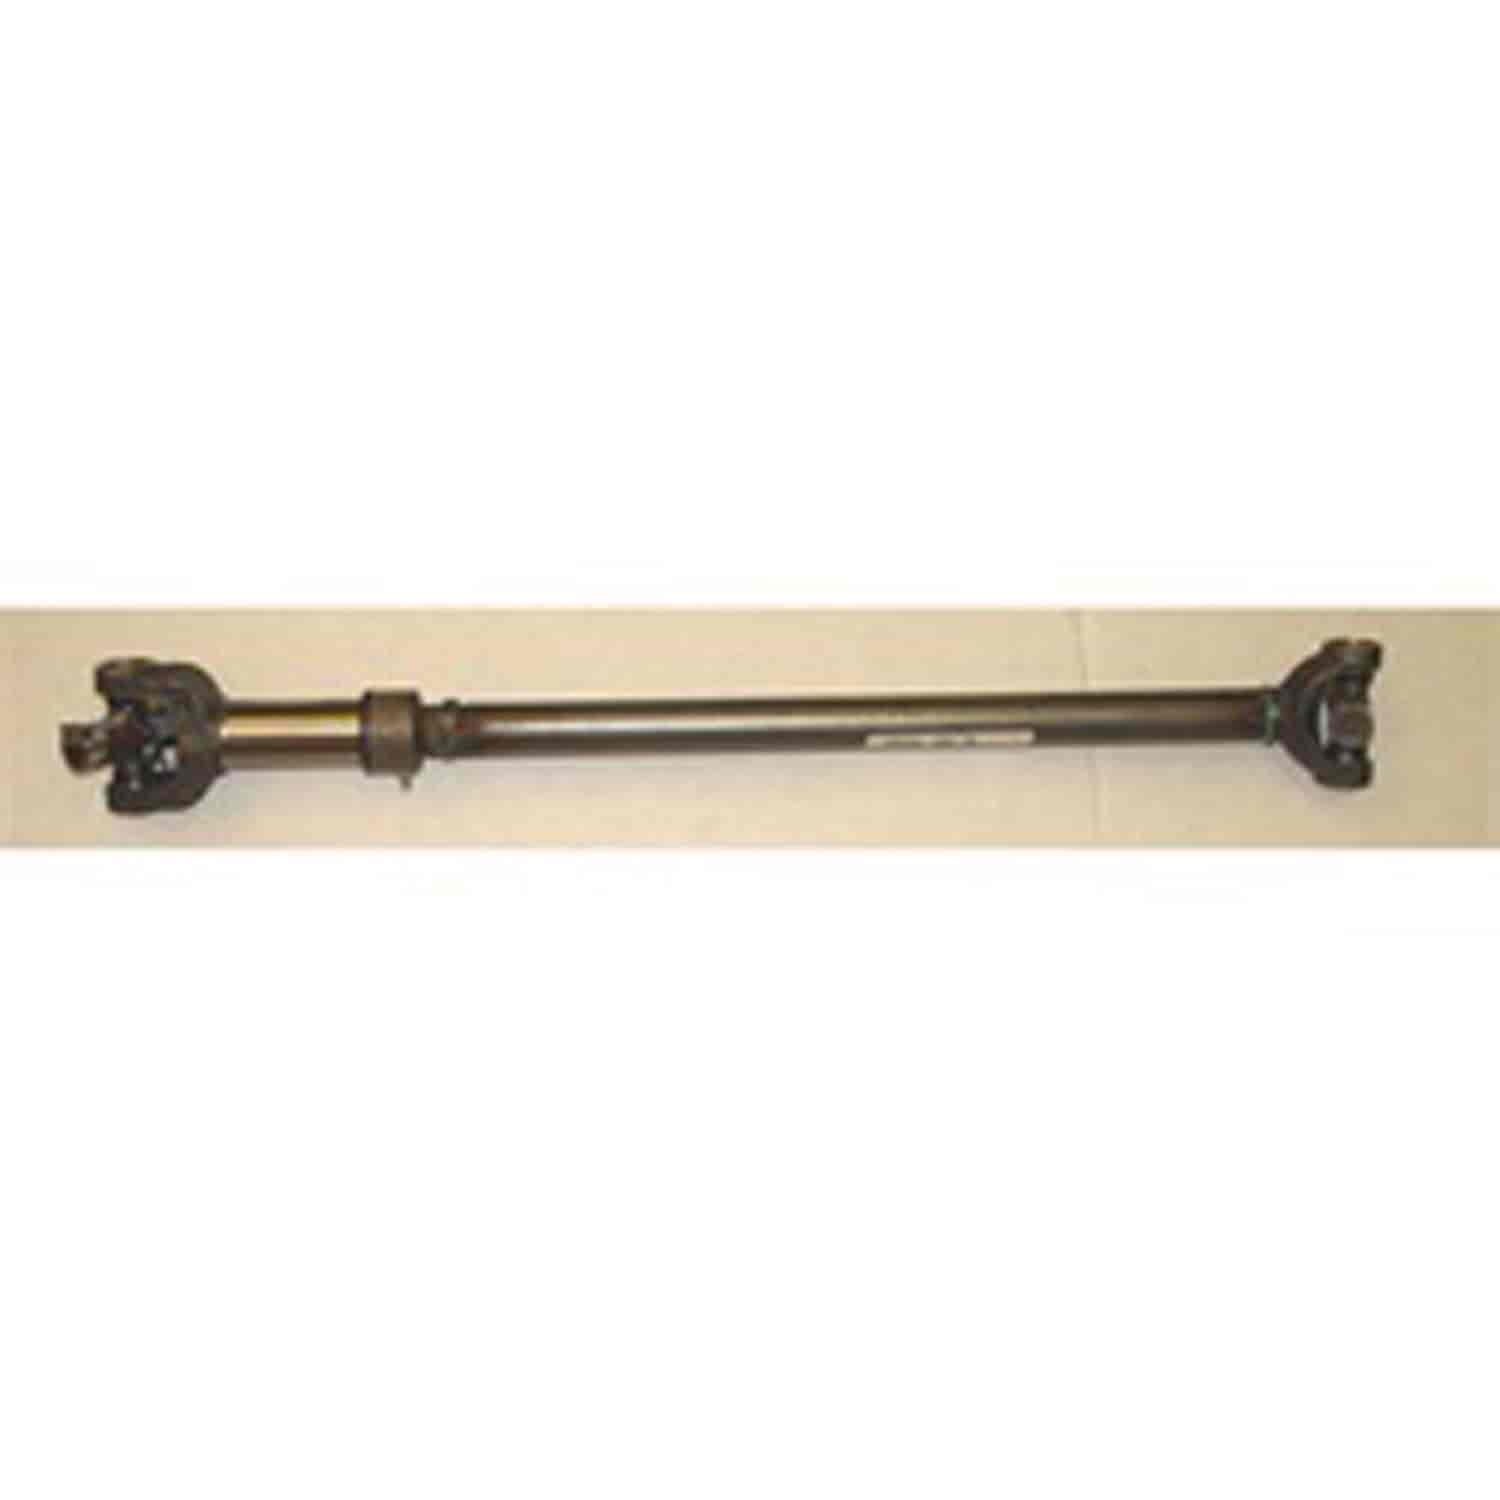 Replacement front driveshaft from Omix-ADA, Fits 80-86 Jeep CJ5 CJ7 and CJ8 with 4 or 6-cylinder